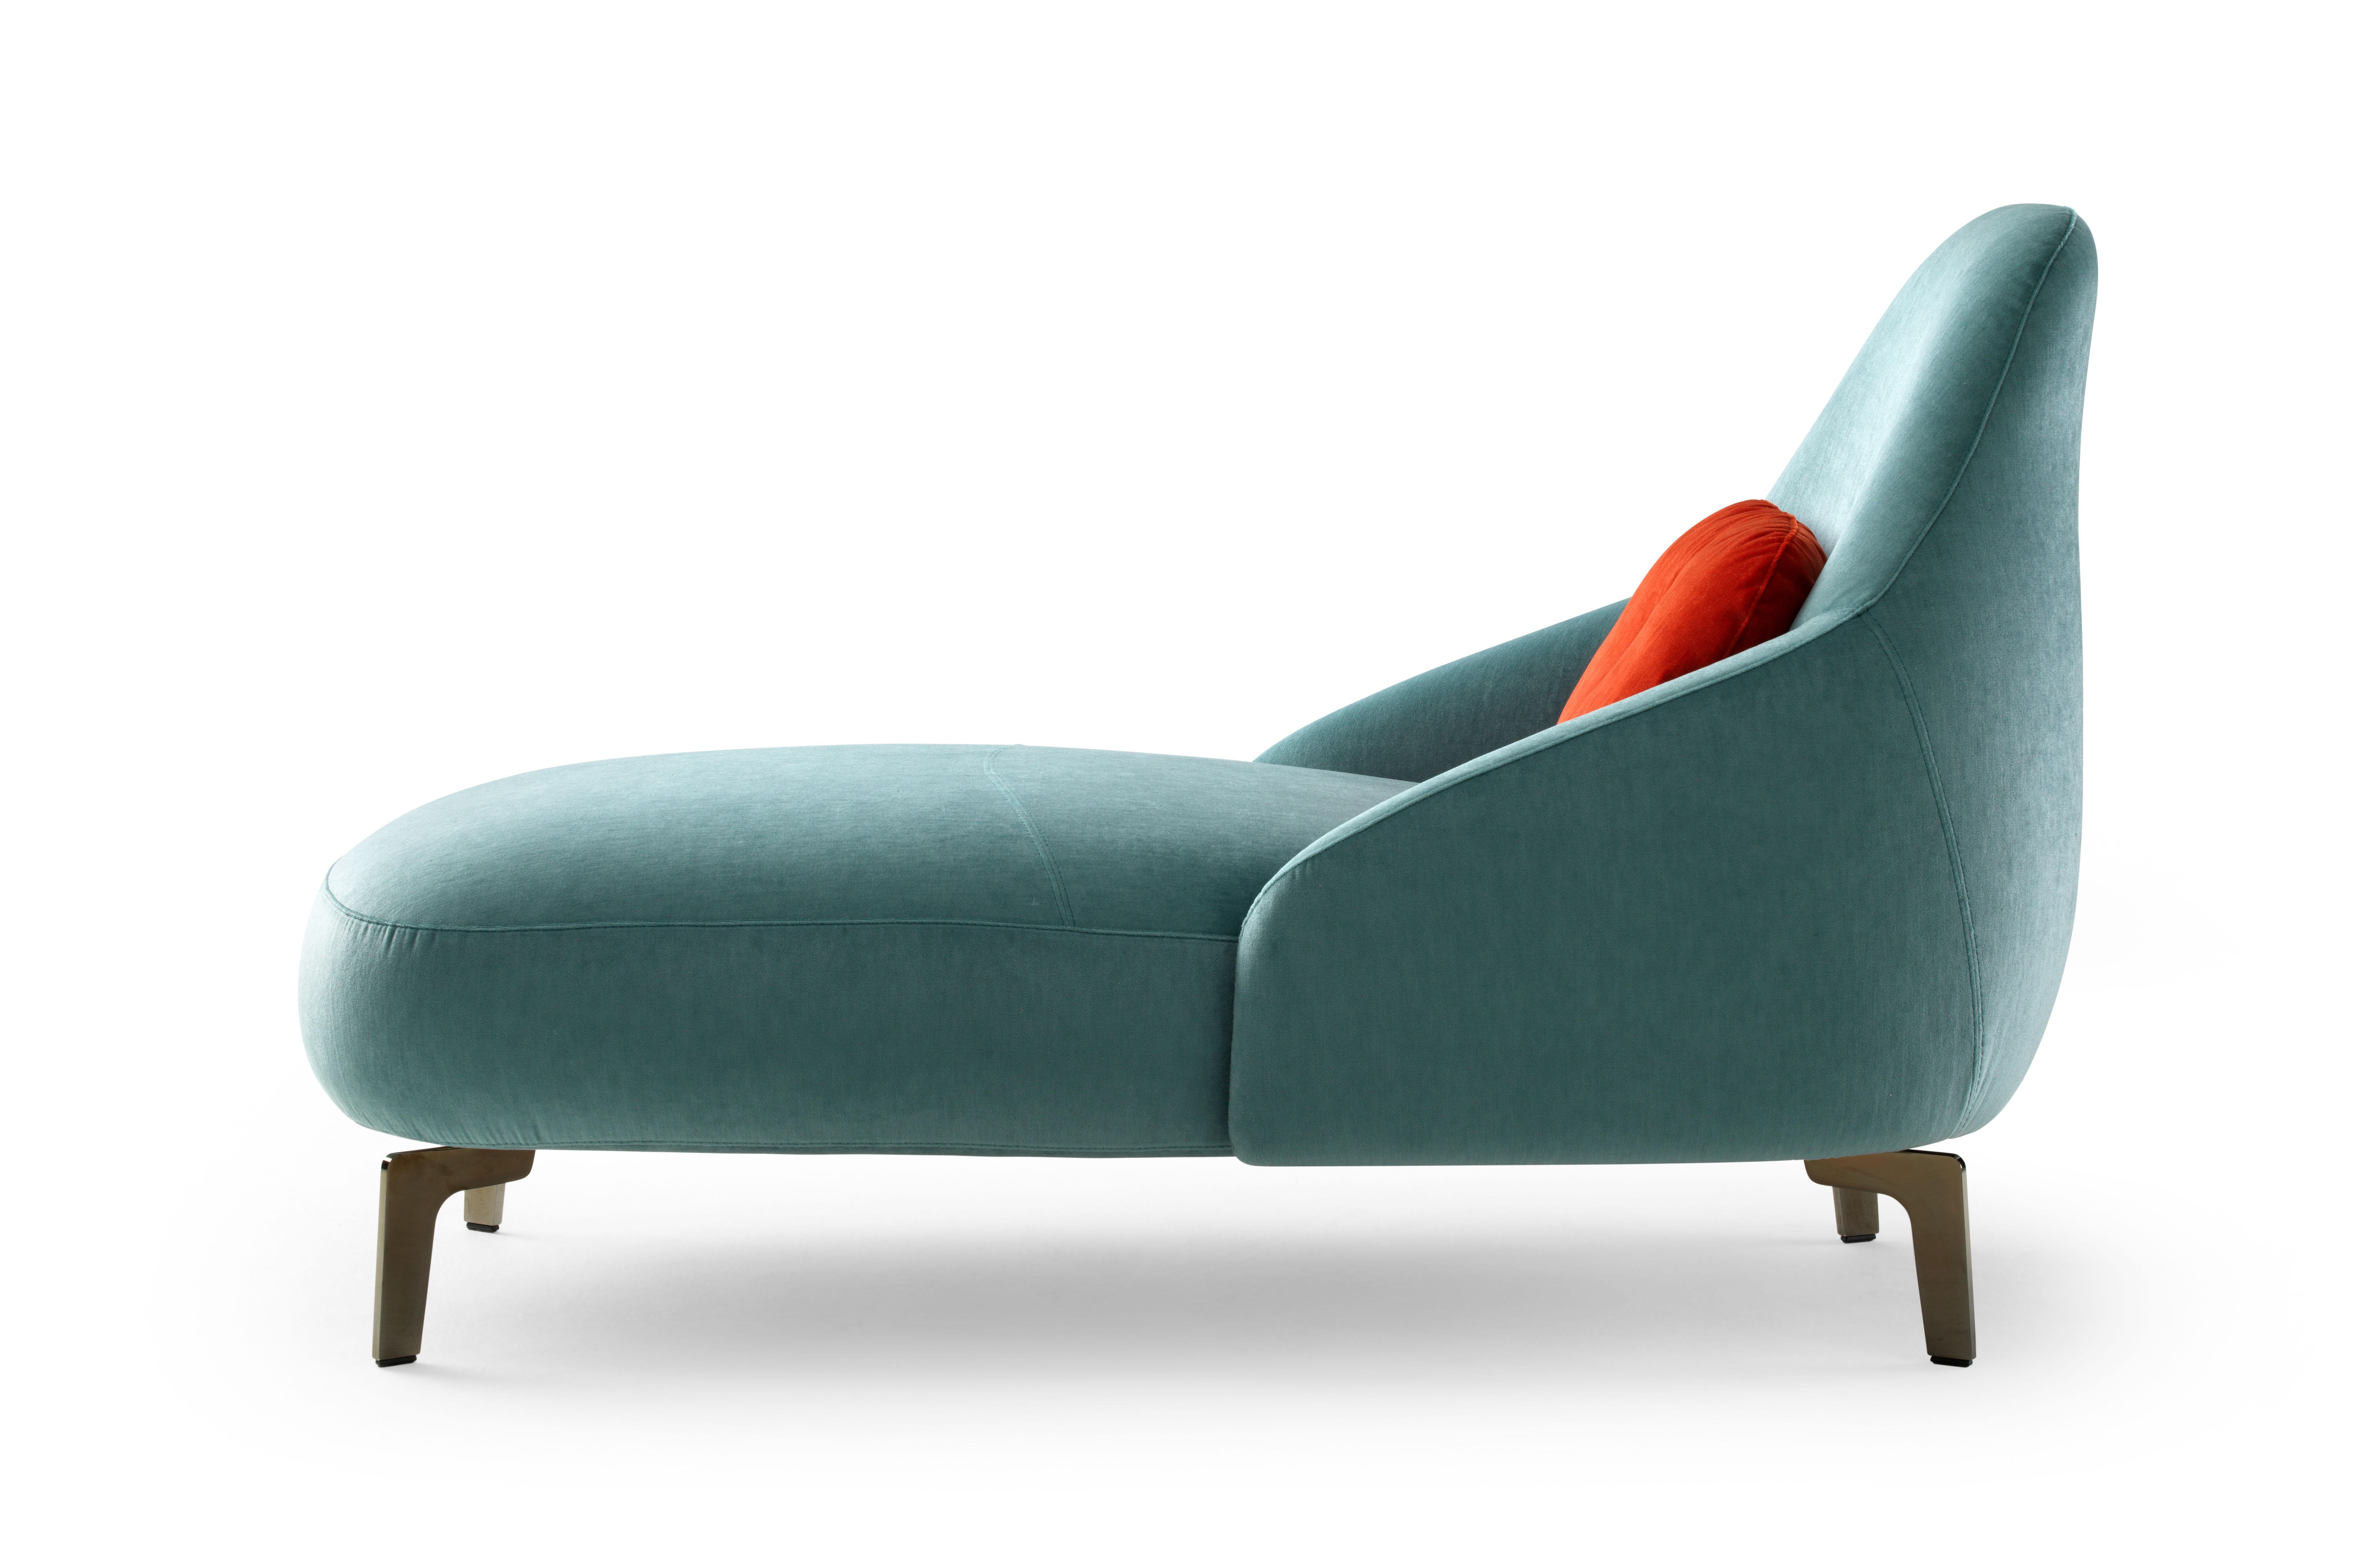 Image-defining and elegant.

The design references a bygone era, inspired by 19th-century luxury hotel and home interiors. The Edward van Vliet style is distinctly evident in the armchair and chaise longue.

He combines a touch of nostalgia with